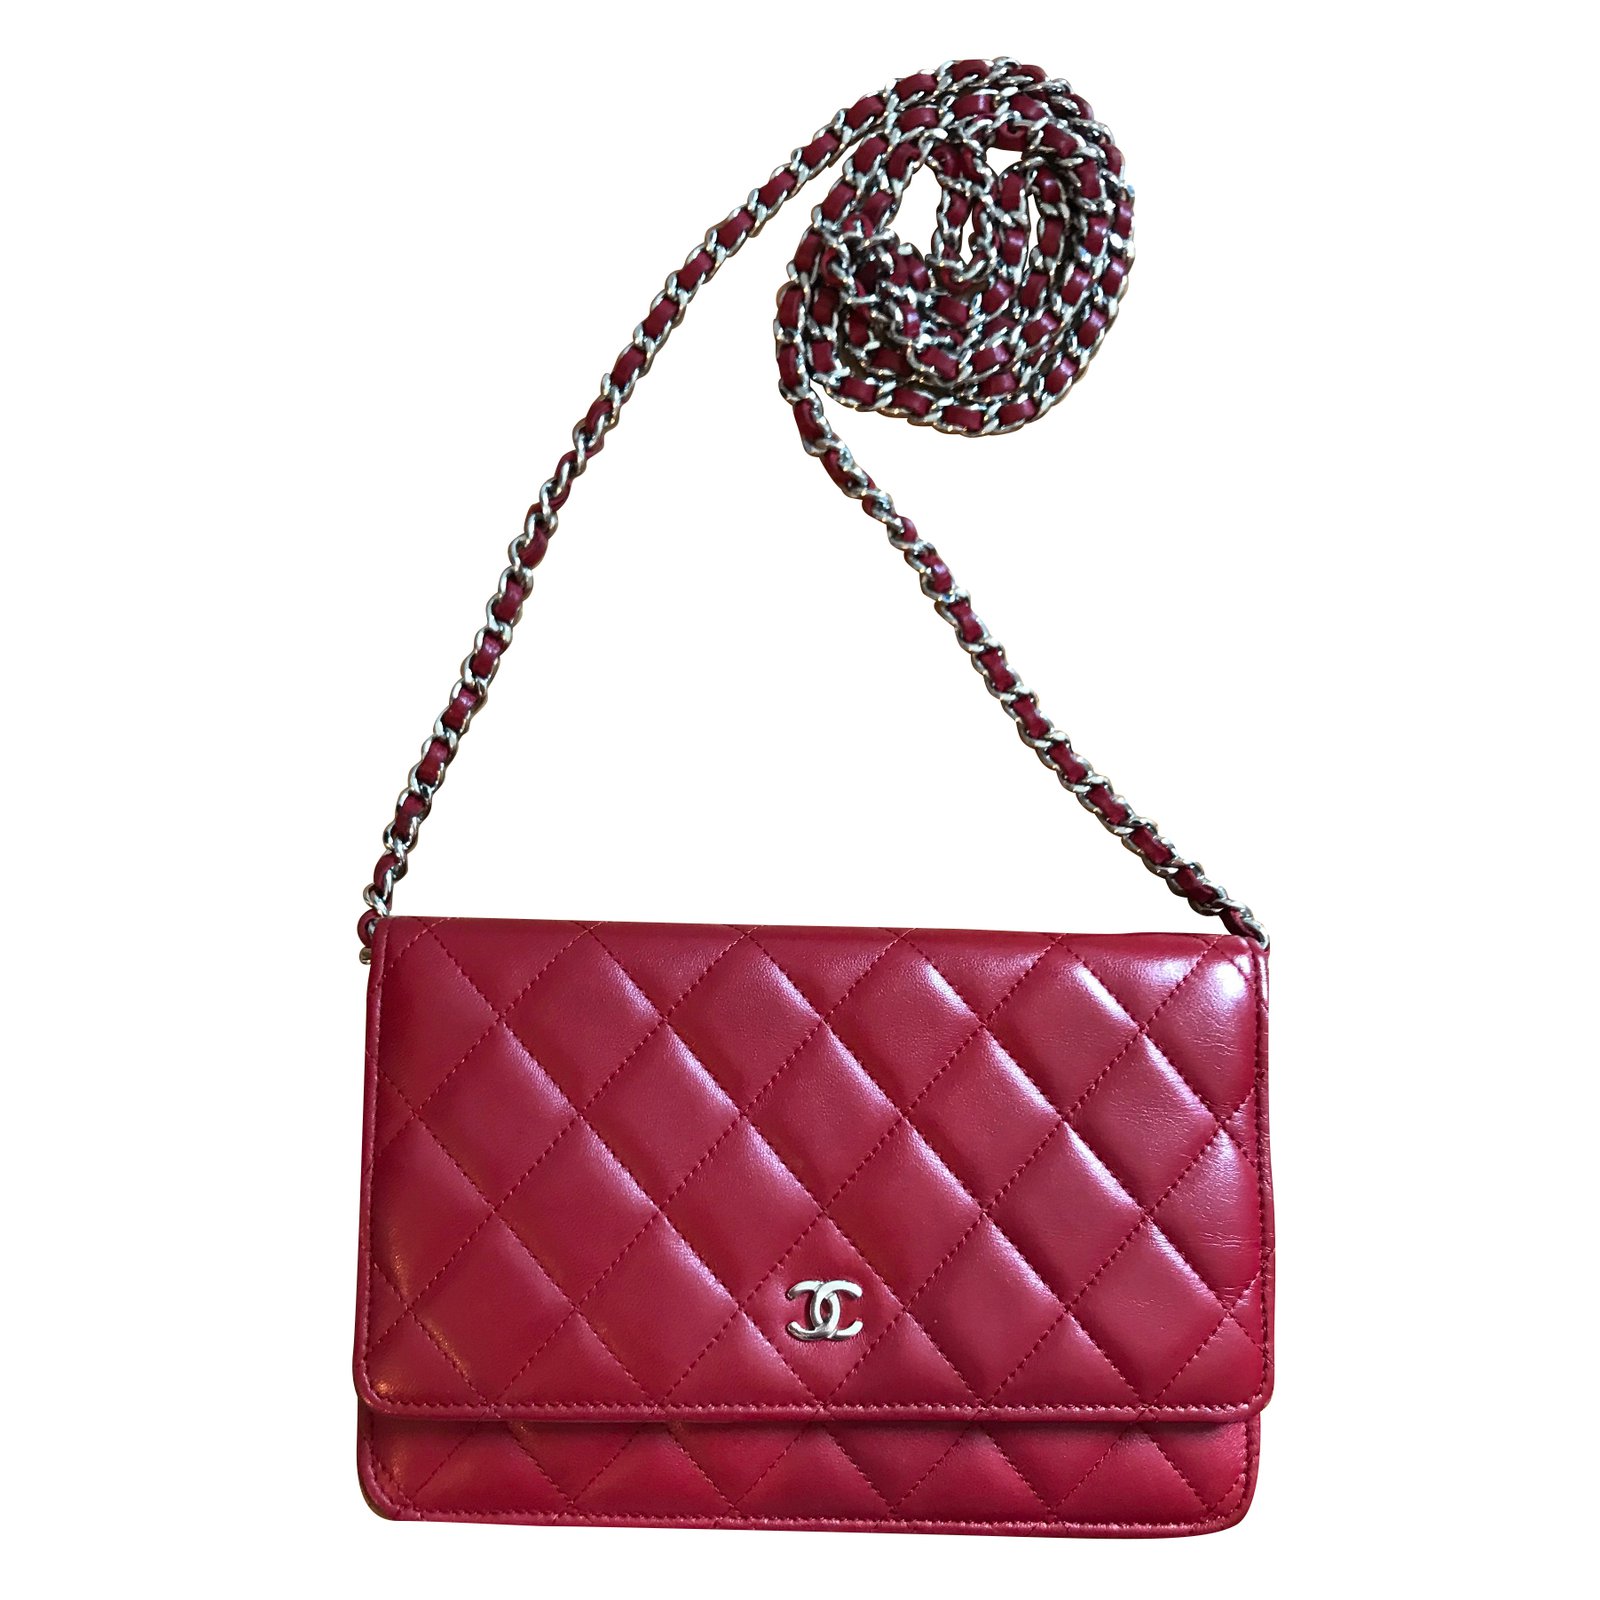 chanel crossbody bag red leather